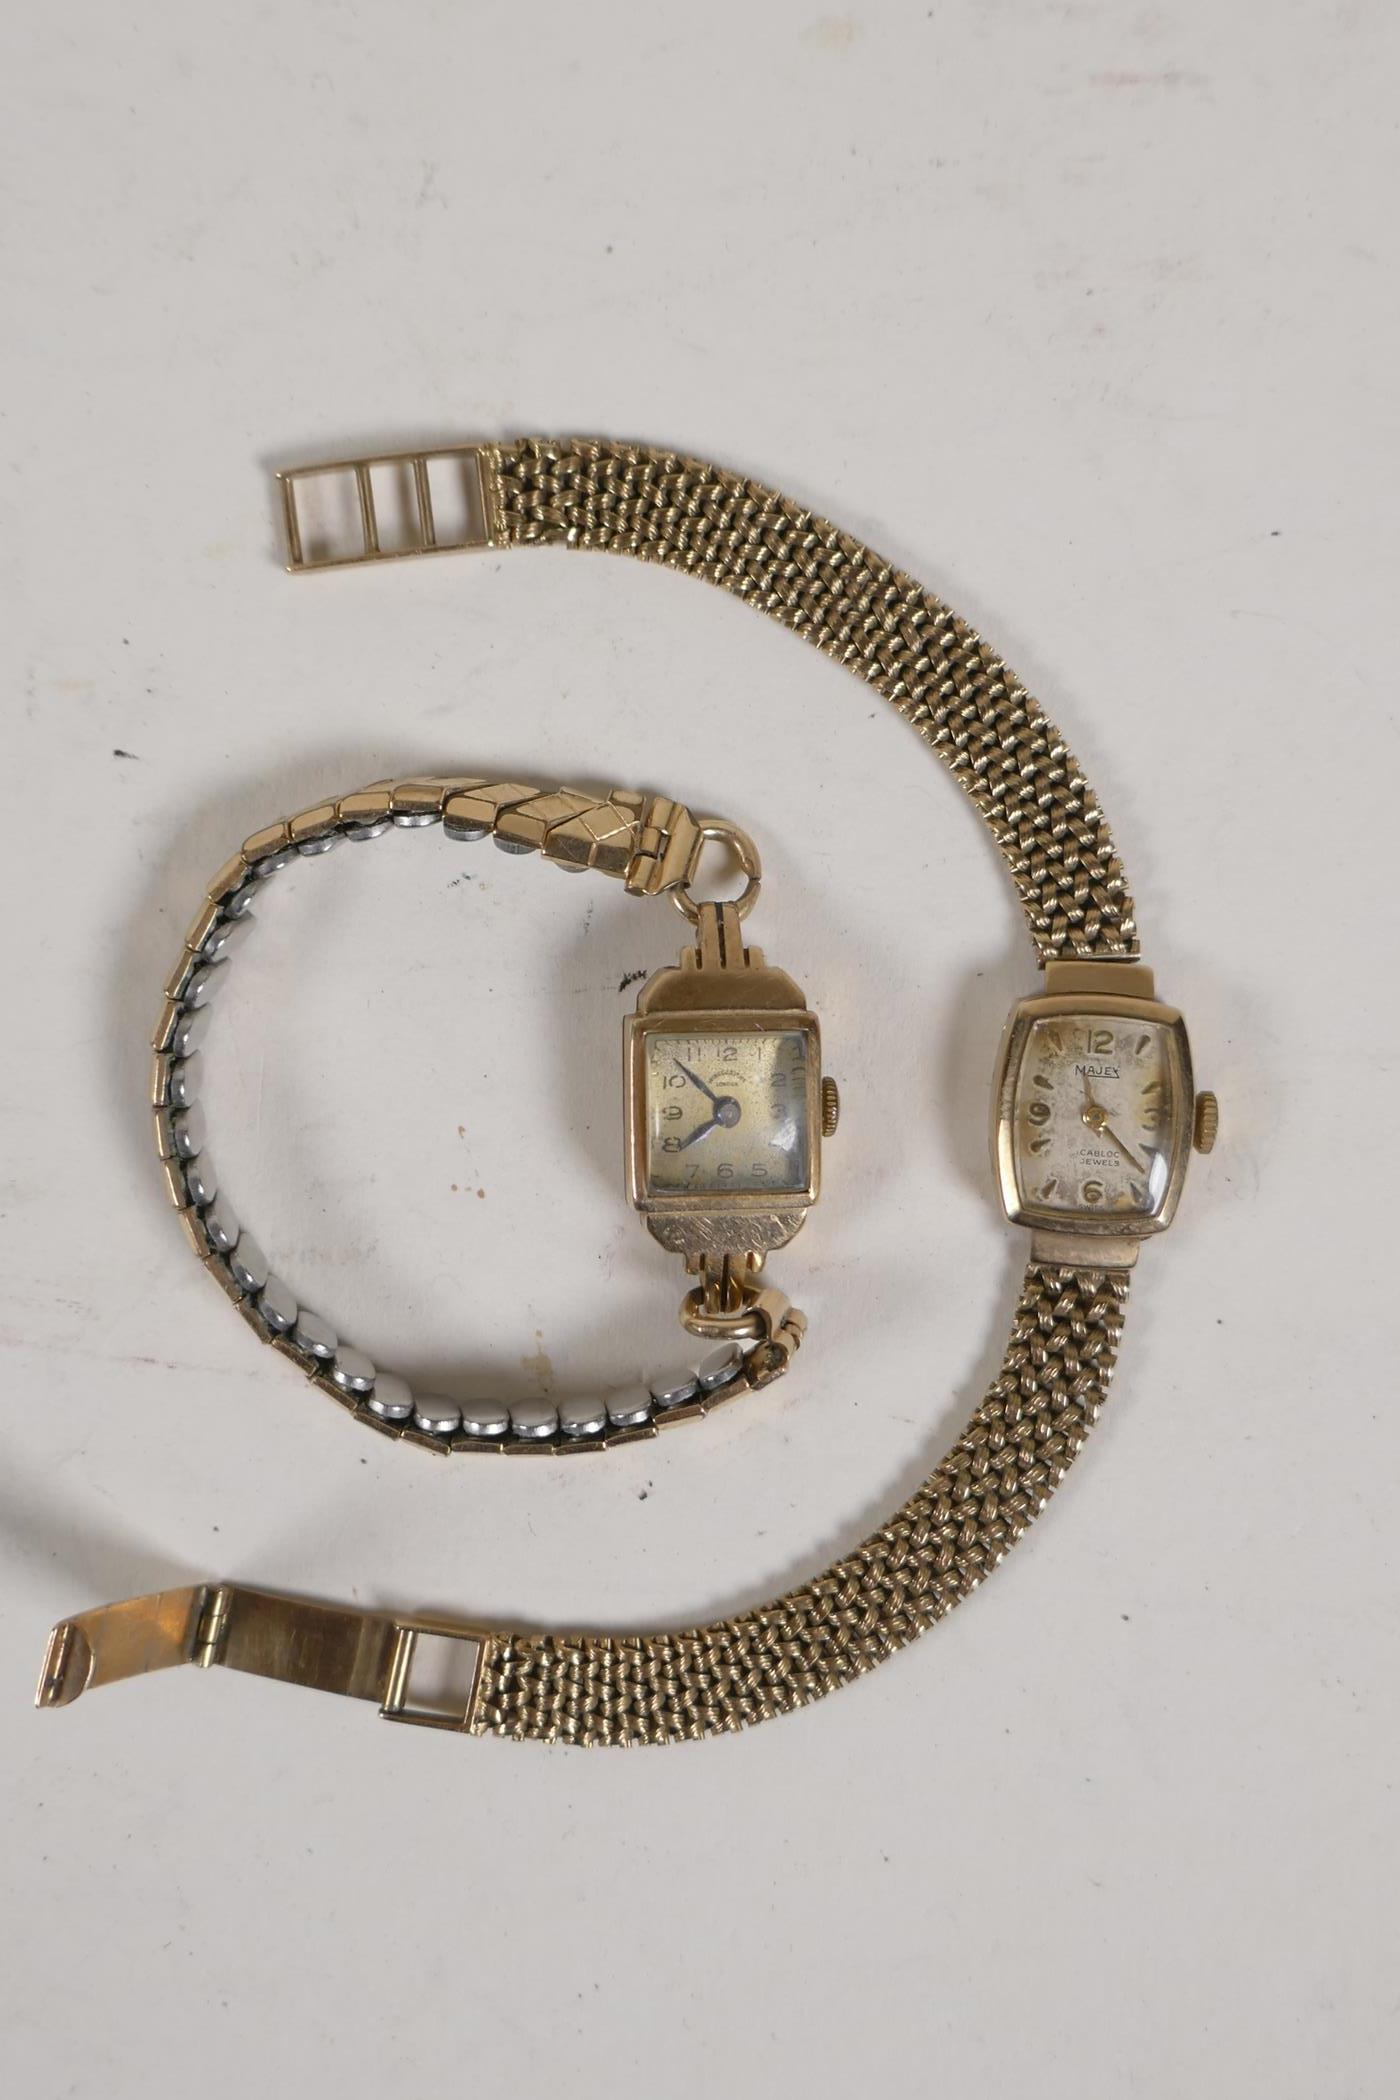 A lady's 9ct gold vintage watch with gold plated strap and another on 9ct gold strap, 17g with